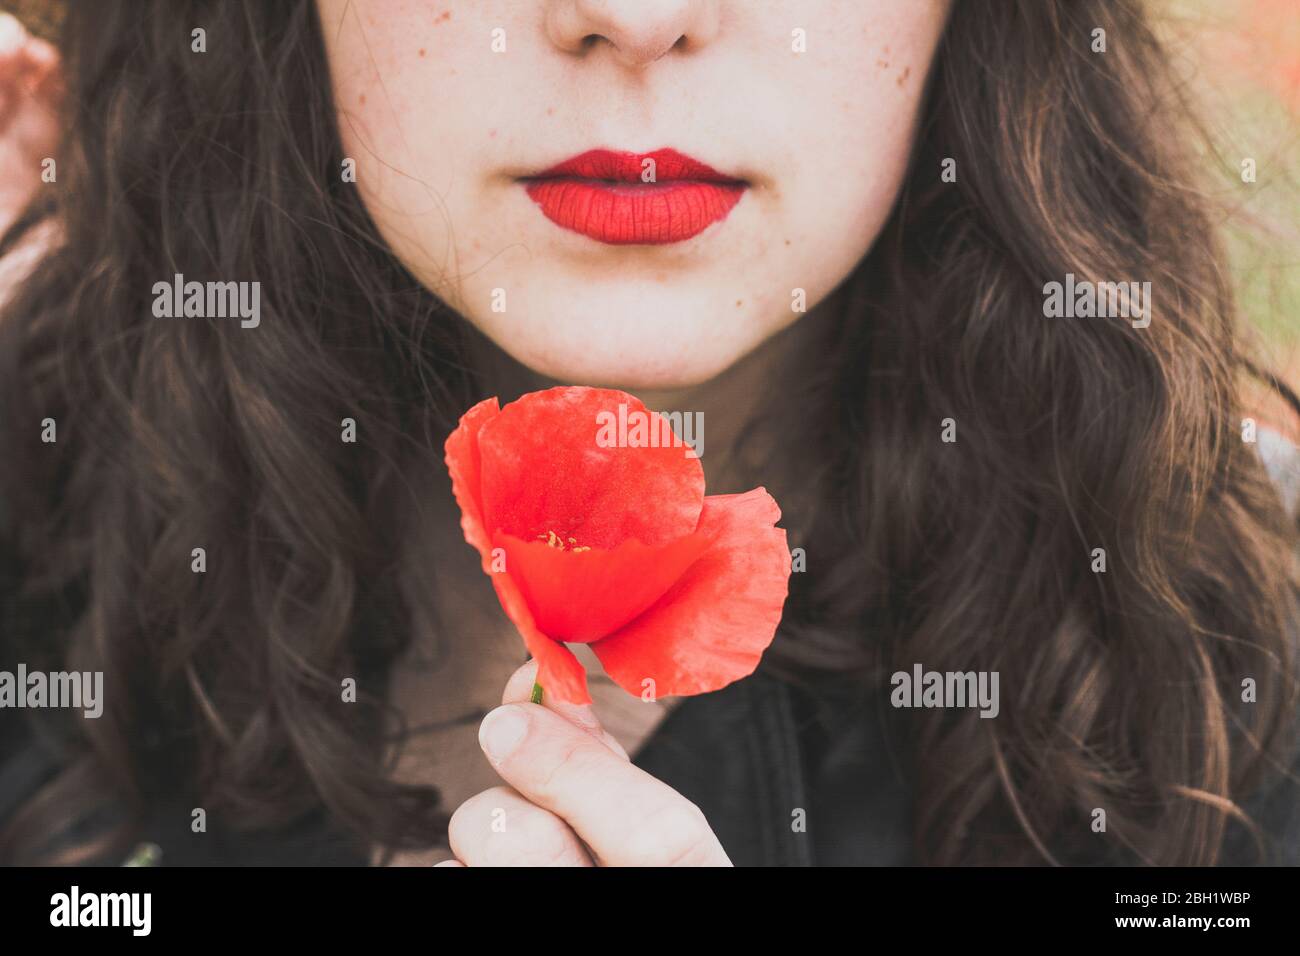 Crop view of young woman with red lips holding poppy Stock Photo